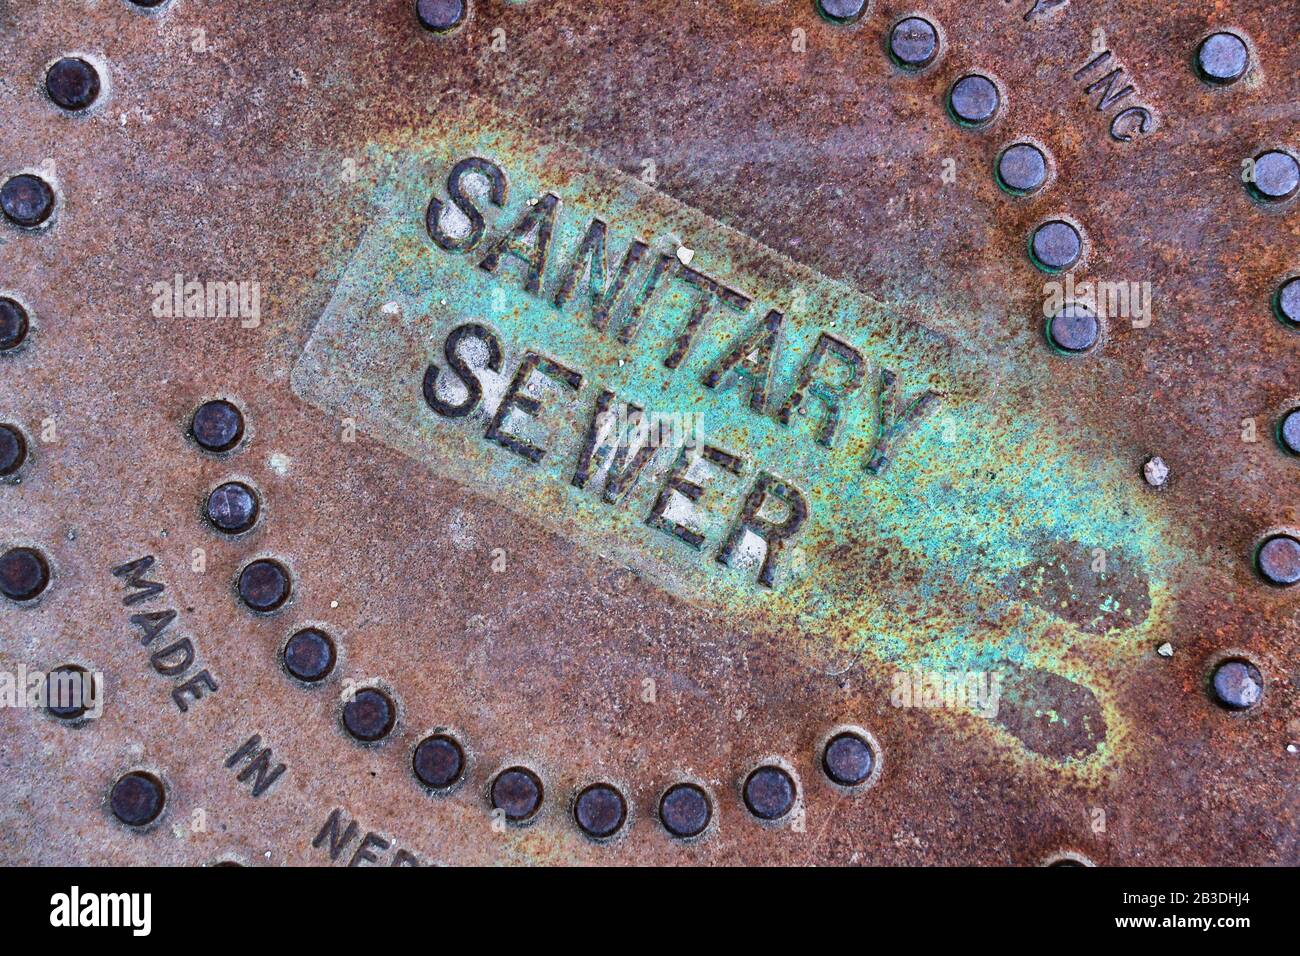 A close up view of a the brown-red and green rusted cover of a sanitation department. Stock Photo